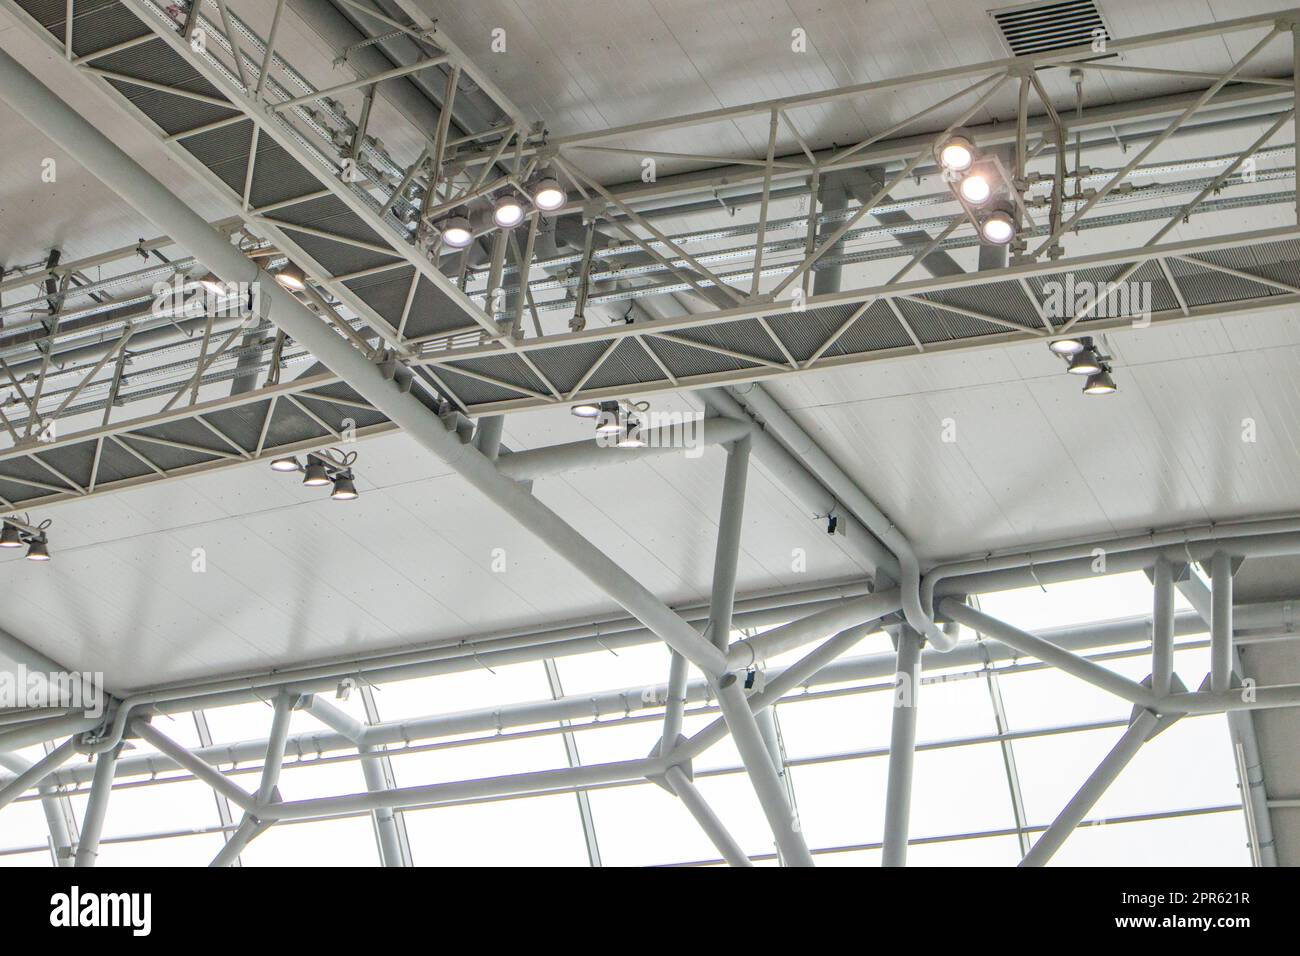 Ceiling with bright lighting in a modern warehouse, shopping center building, airport or other commercial real estate object. Directional LED lights on rails under the ceiling Stock Photo